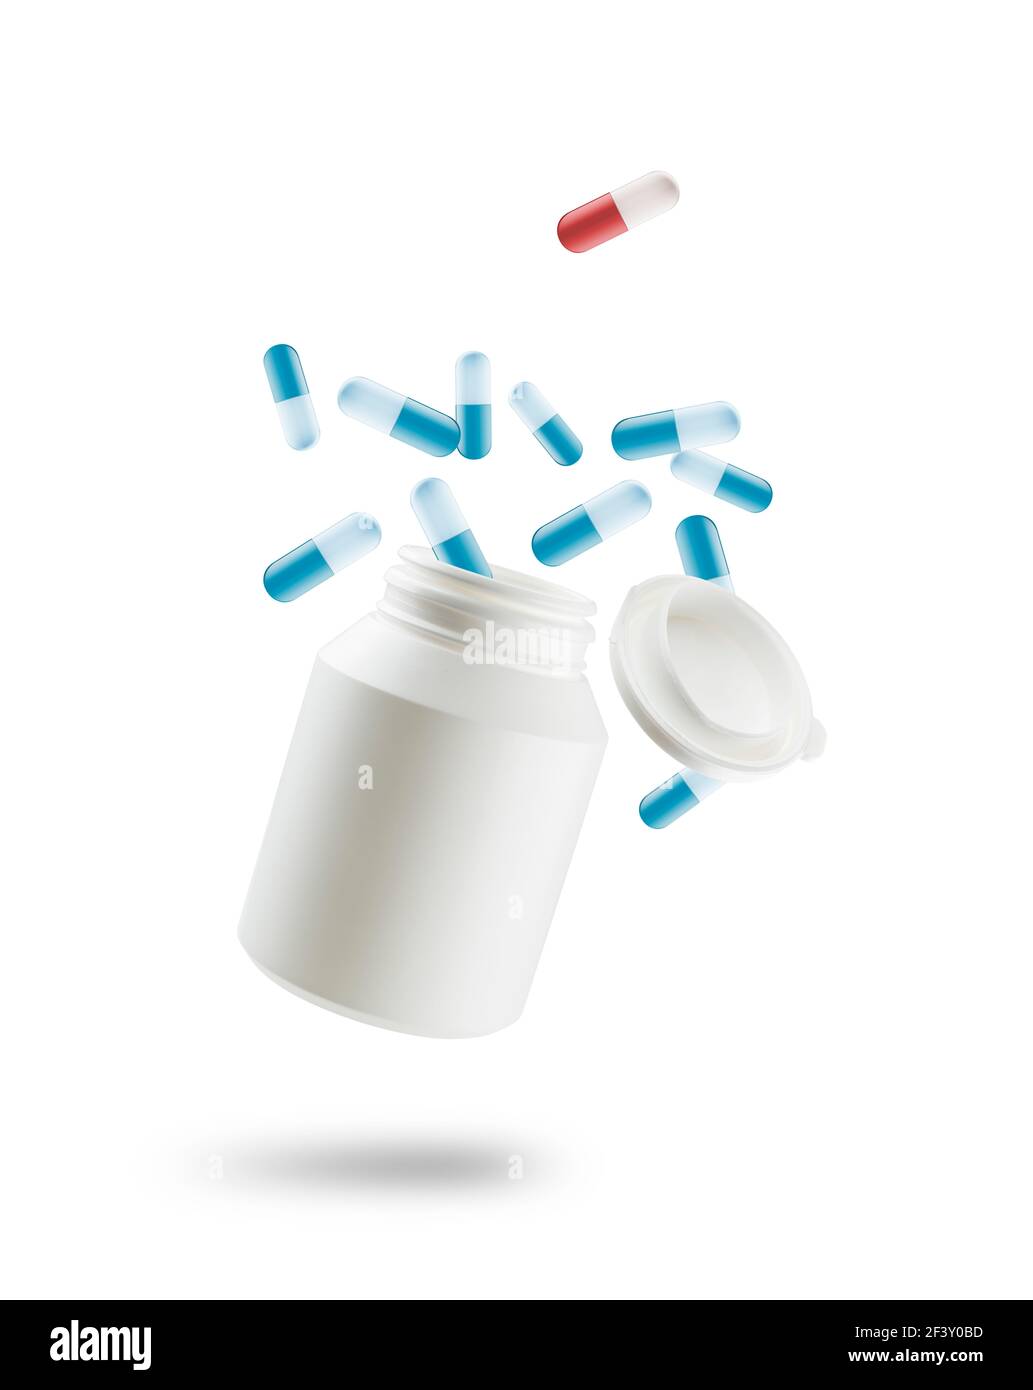 Medicine blue capsules and red one jump out from bottle, on white background Stock Photo